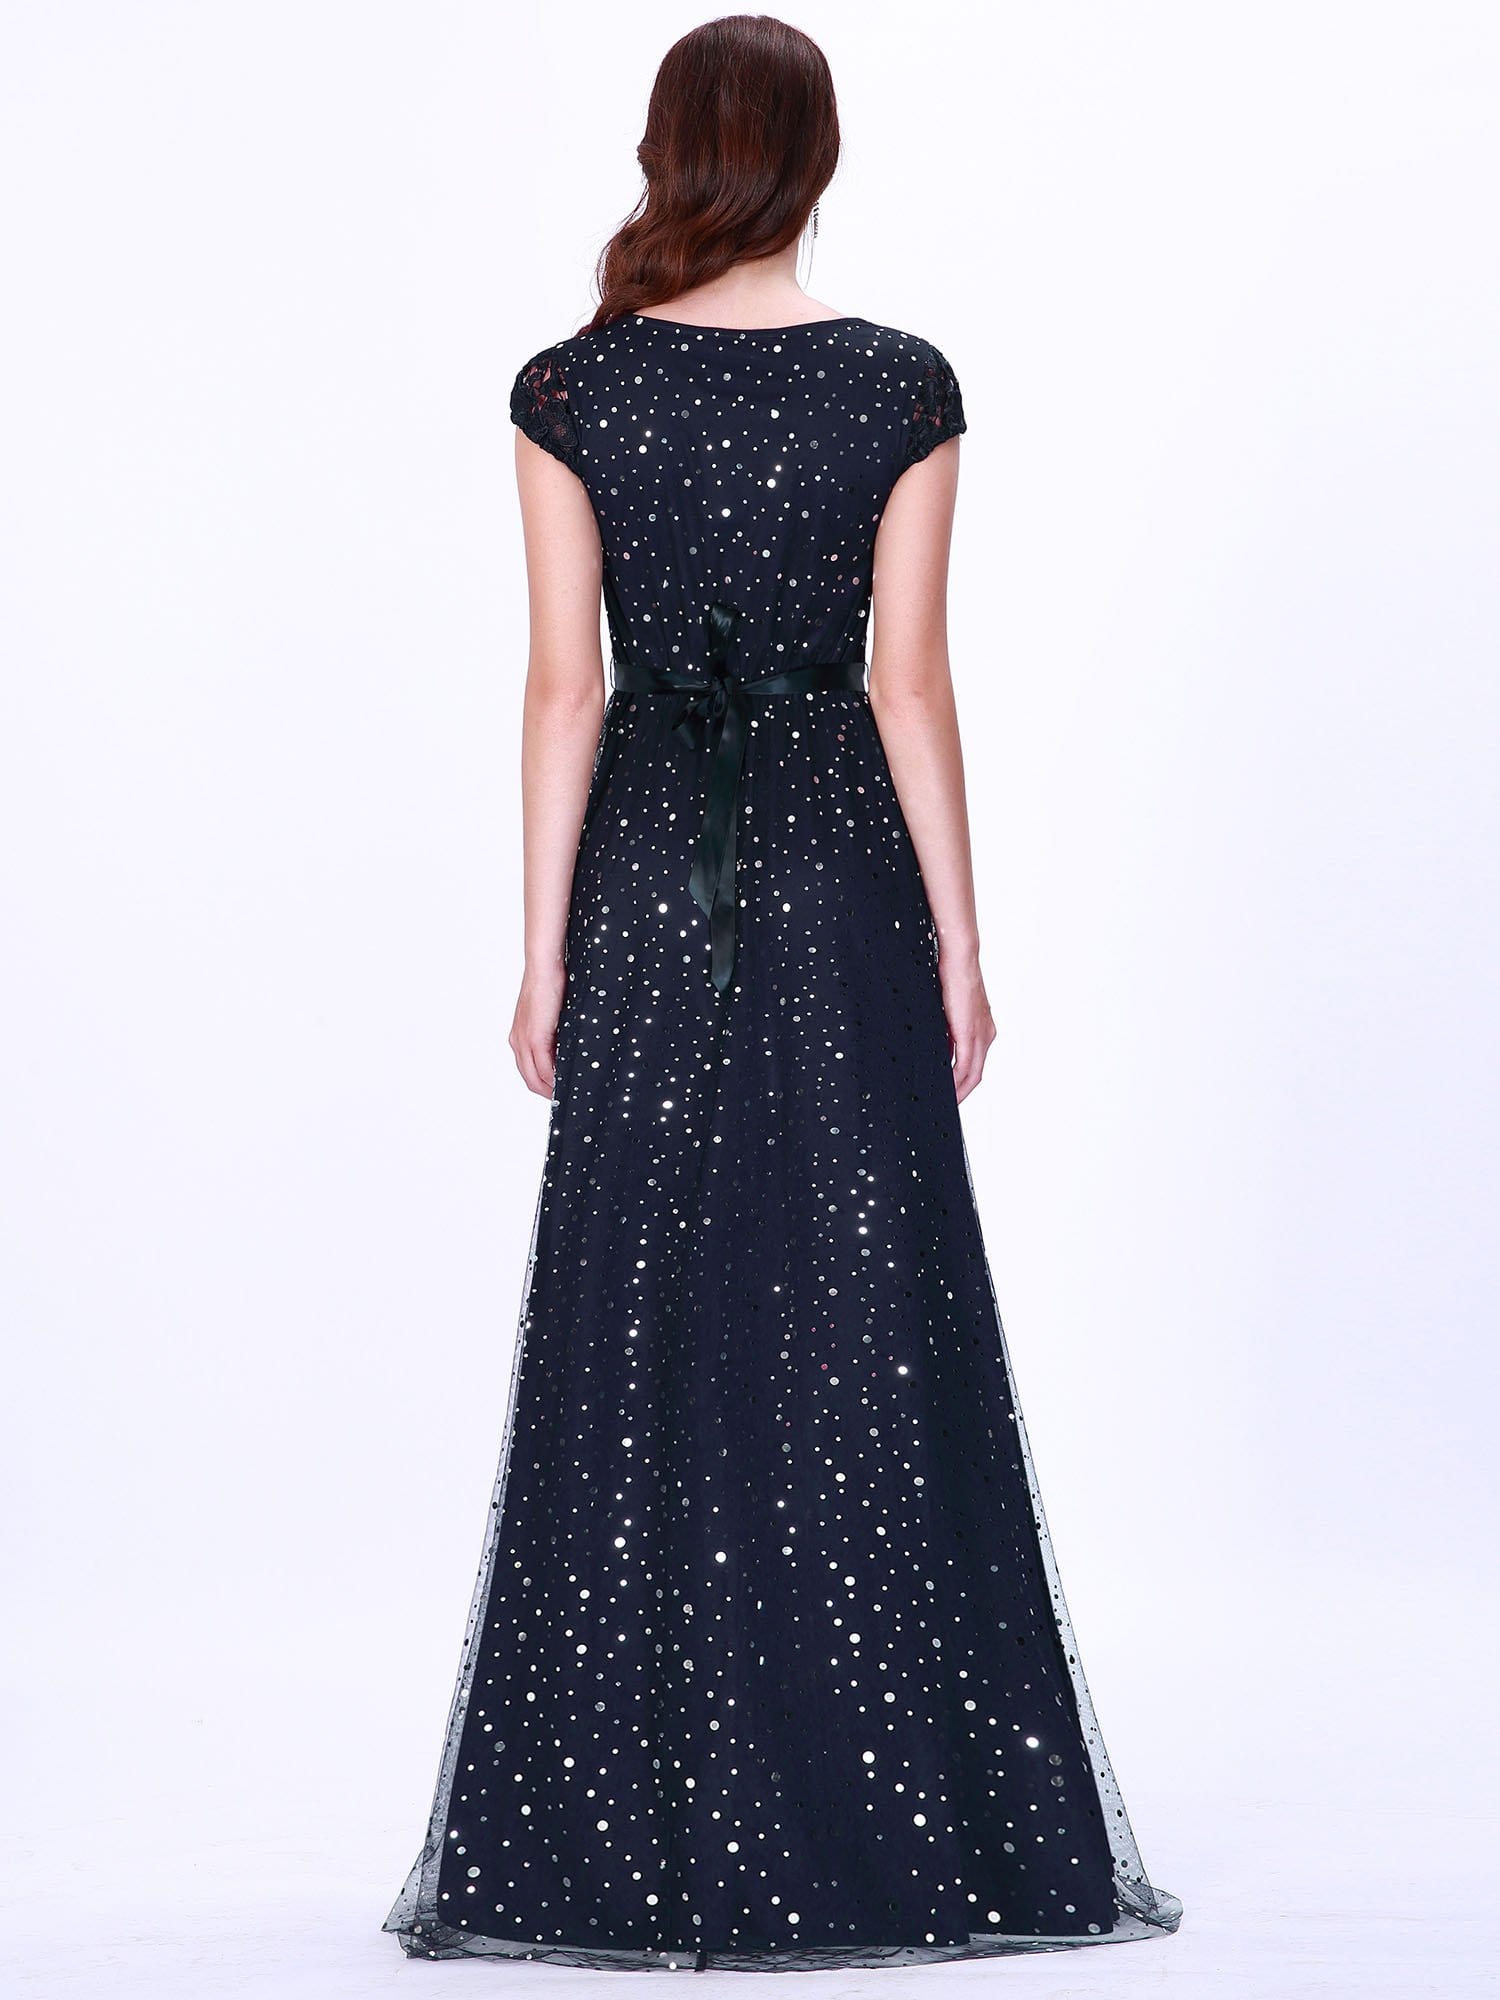 ever pretty lace cap sleeve evening gown